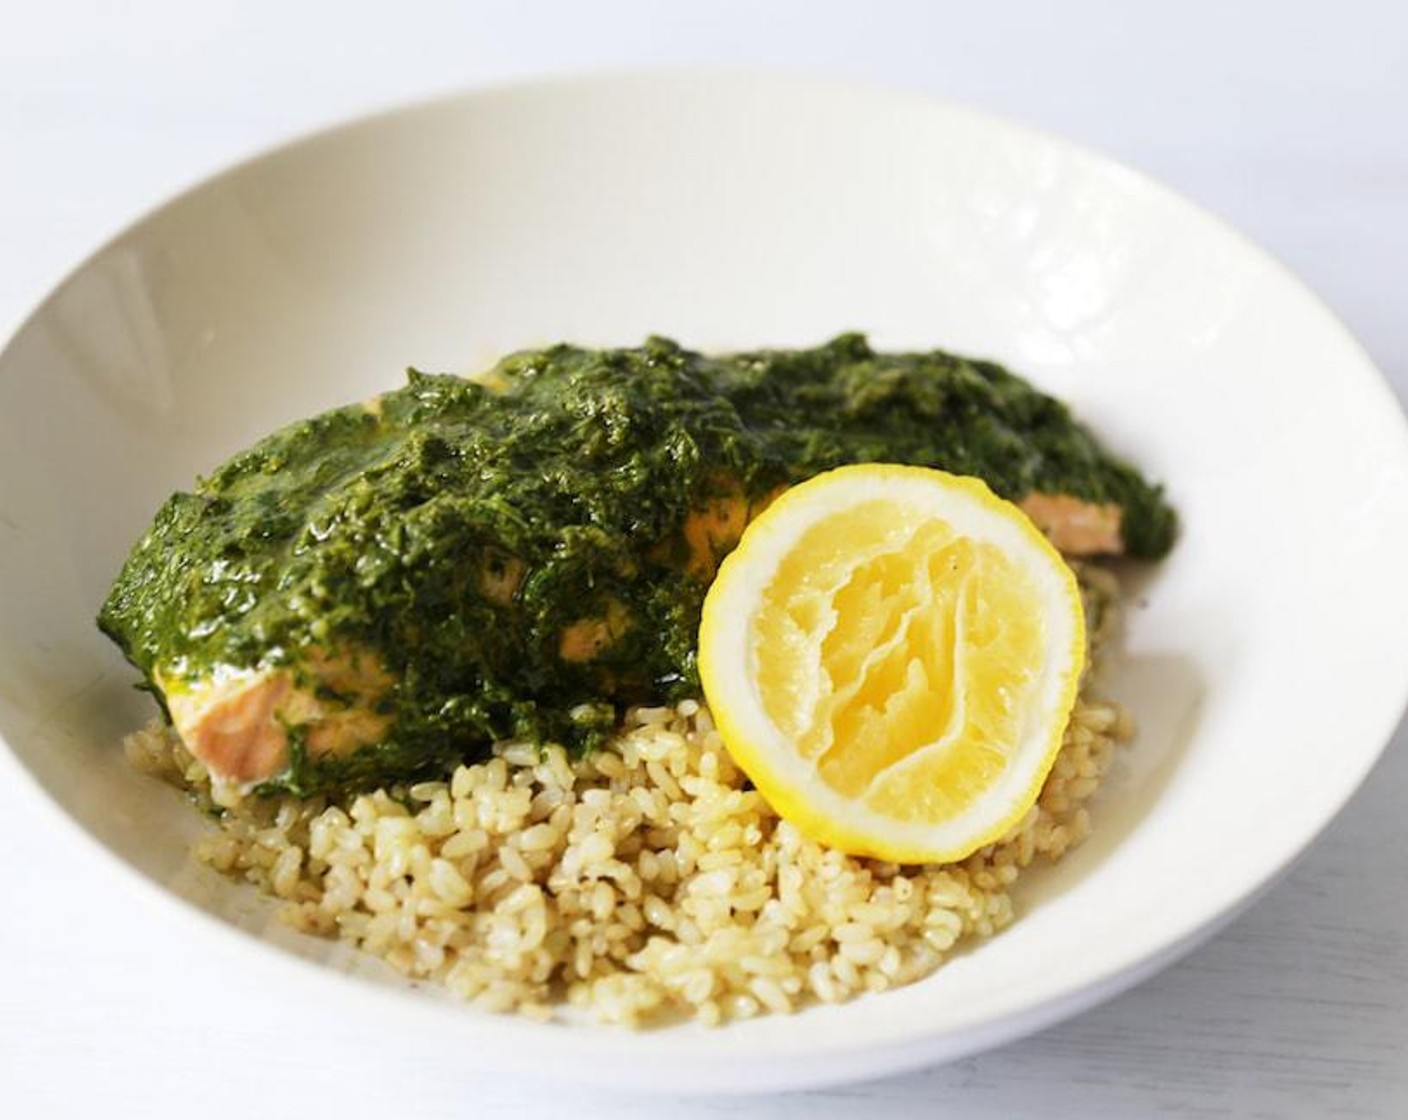 step 6 Serve the salmon with the brown rice, topped with the herb sauce. Enjoy!